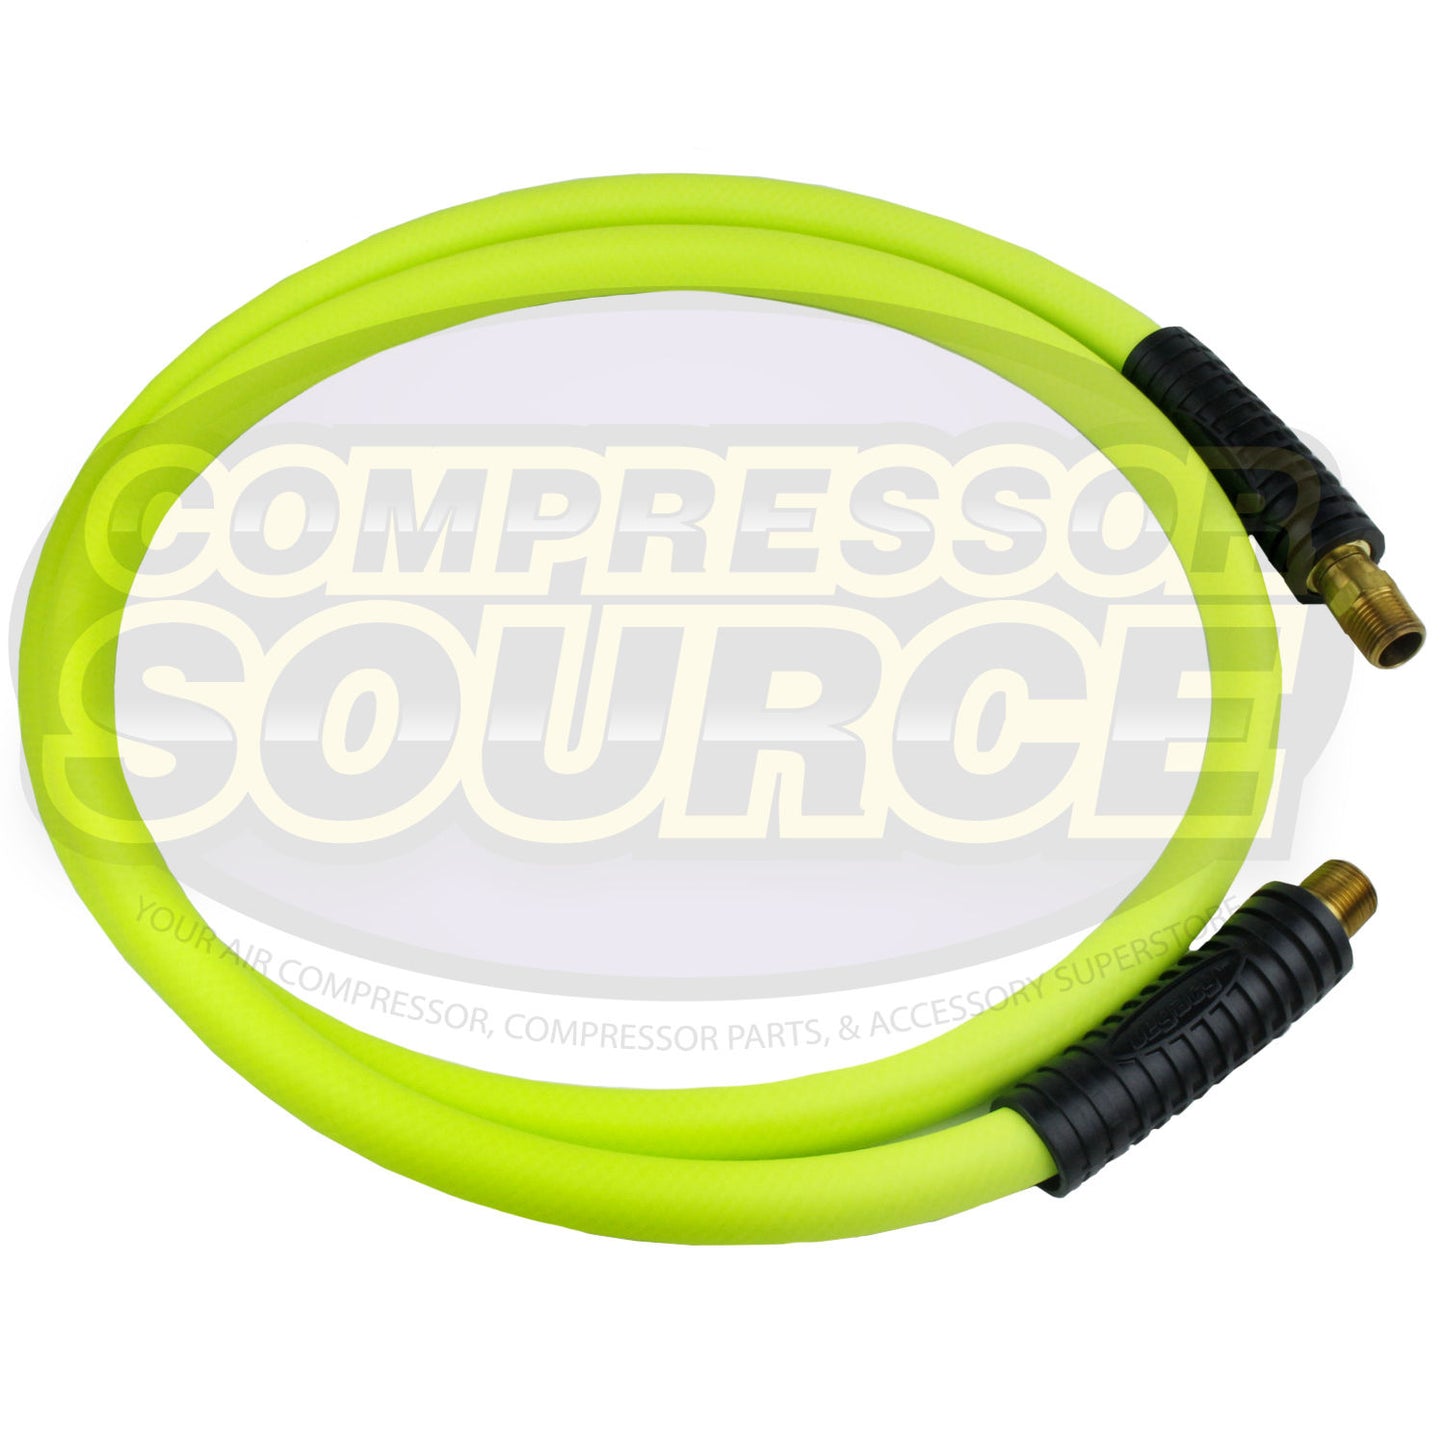 New Flexzilla 1/2 x 6' FT Air Hose Whip With 1/2' MNPT Swivel HFZ1206 –  compressor-source